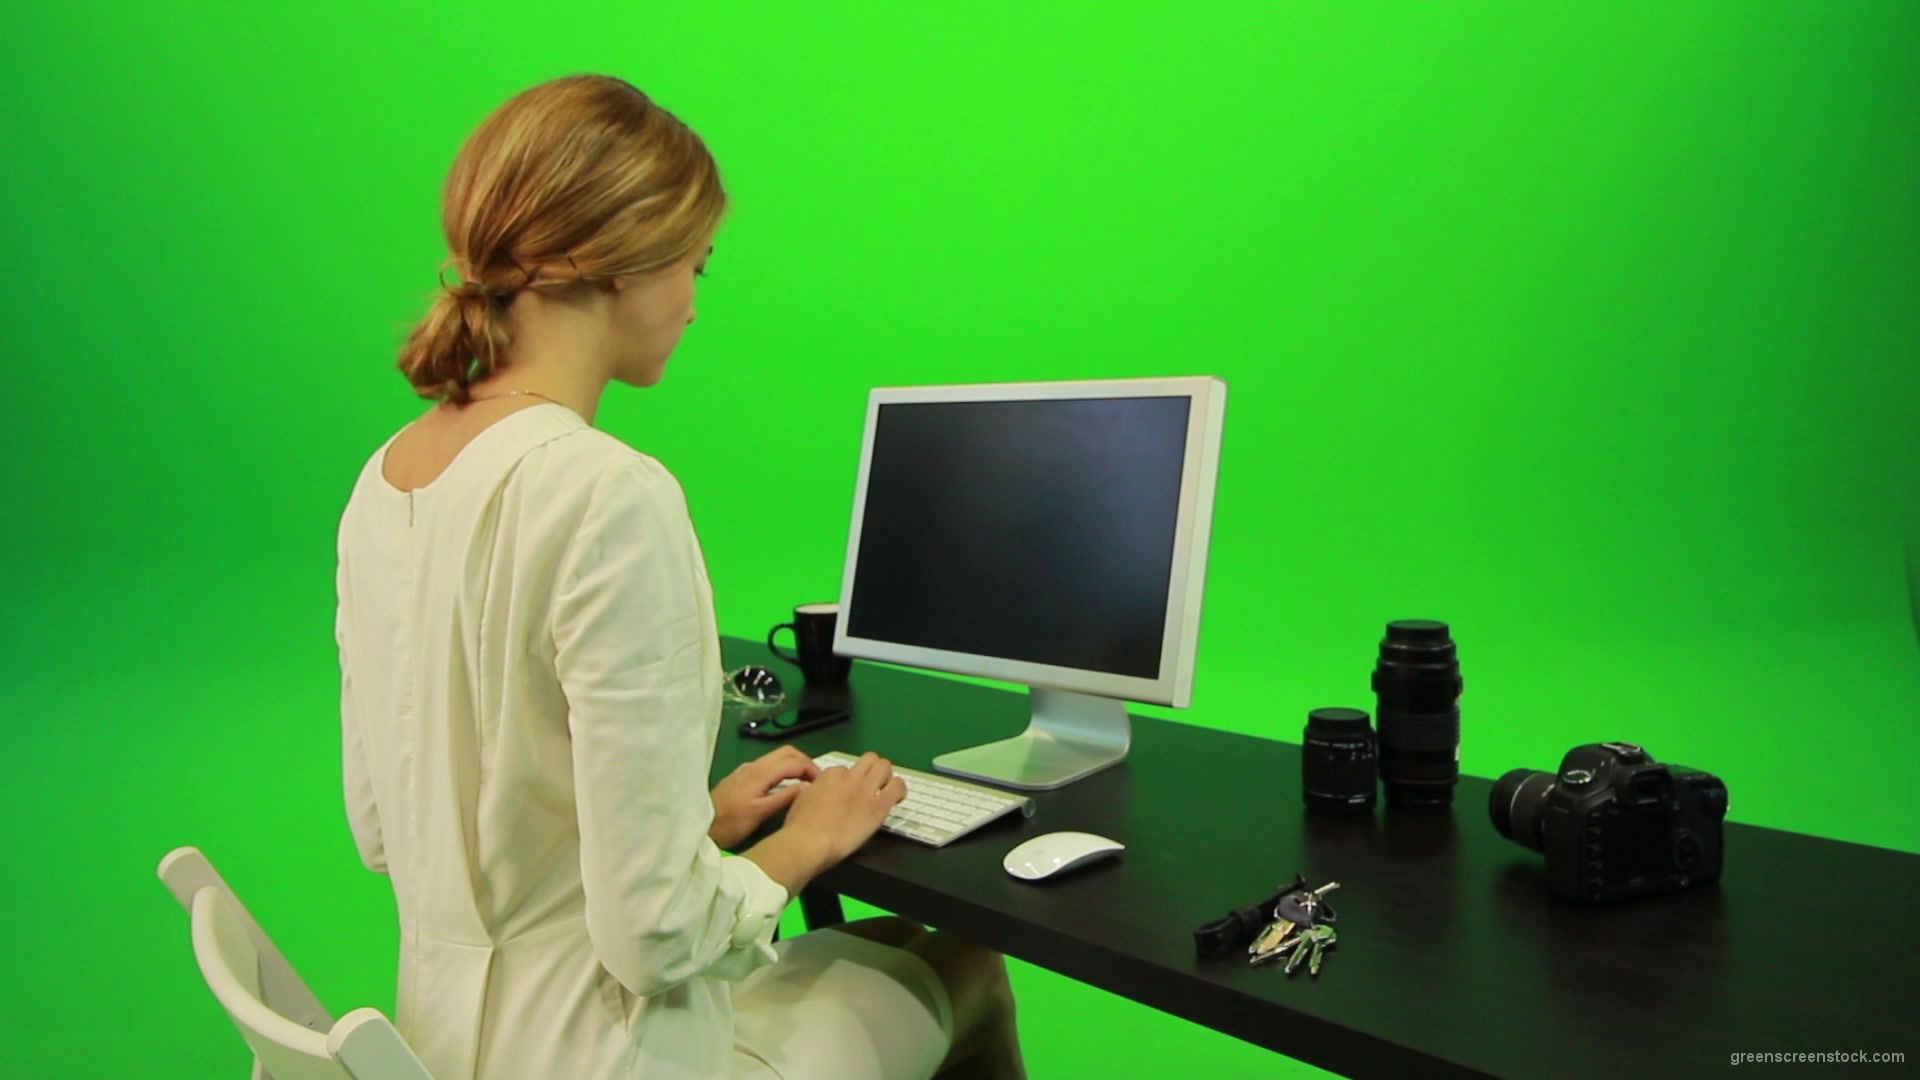 Woman-Sits-Down-and-Works-on-the-Computer-Green-Screen-Footage_007 Green Screen Stock